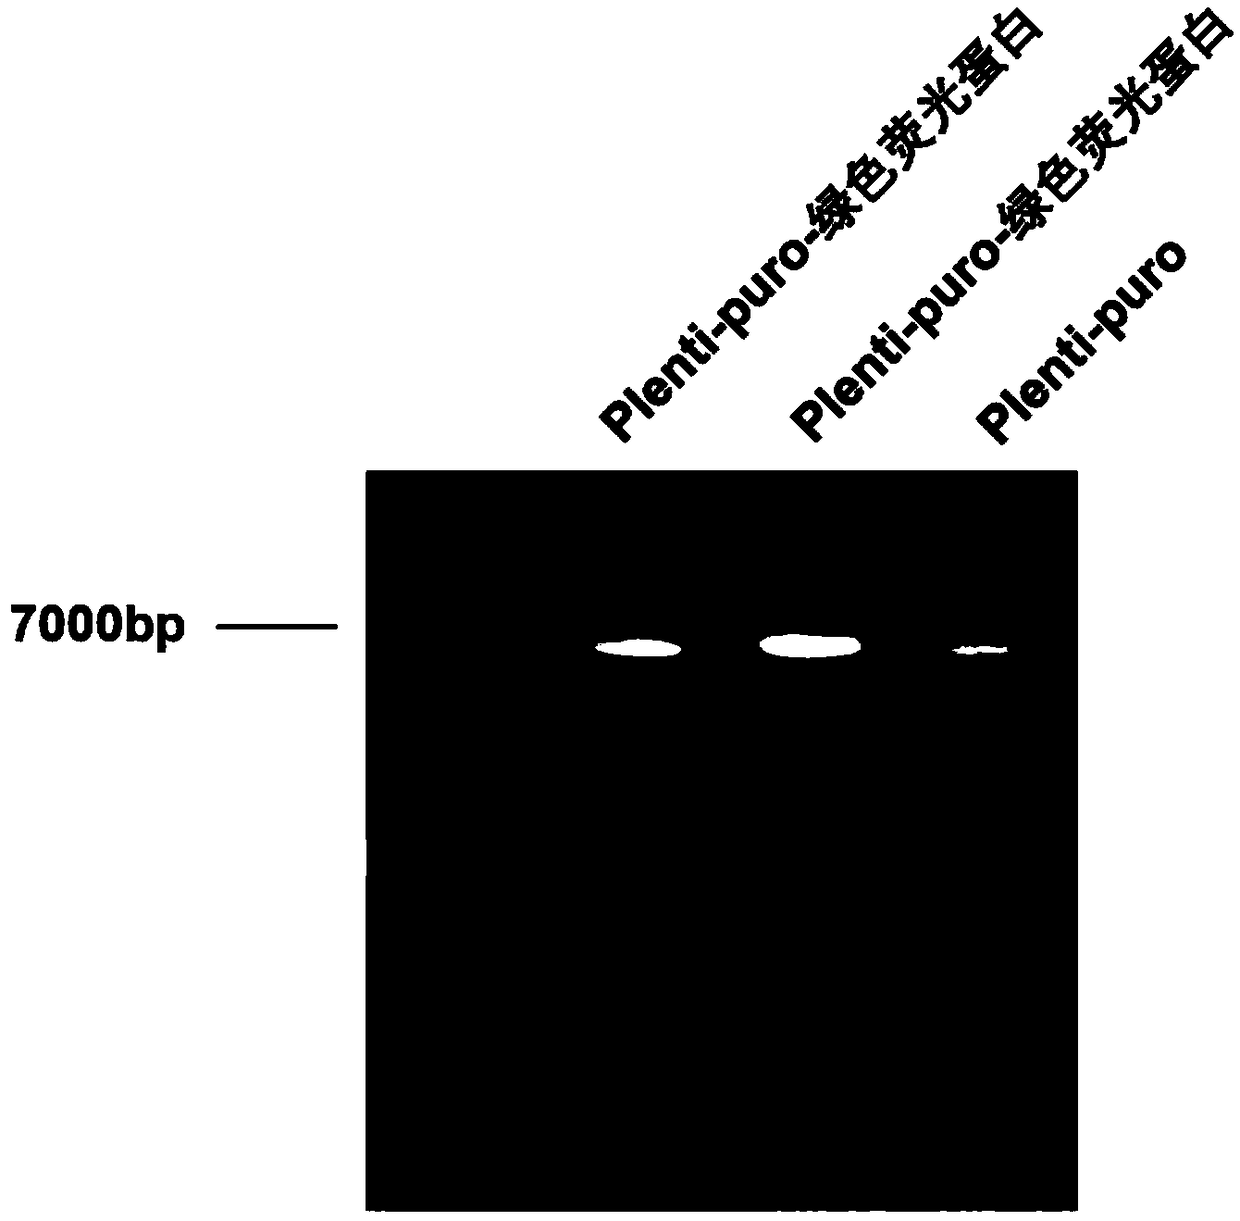 Method for constructing laryngeal cancer cell line for stably expressing green fluorescent protein